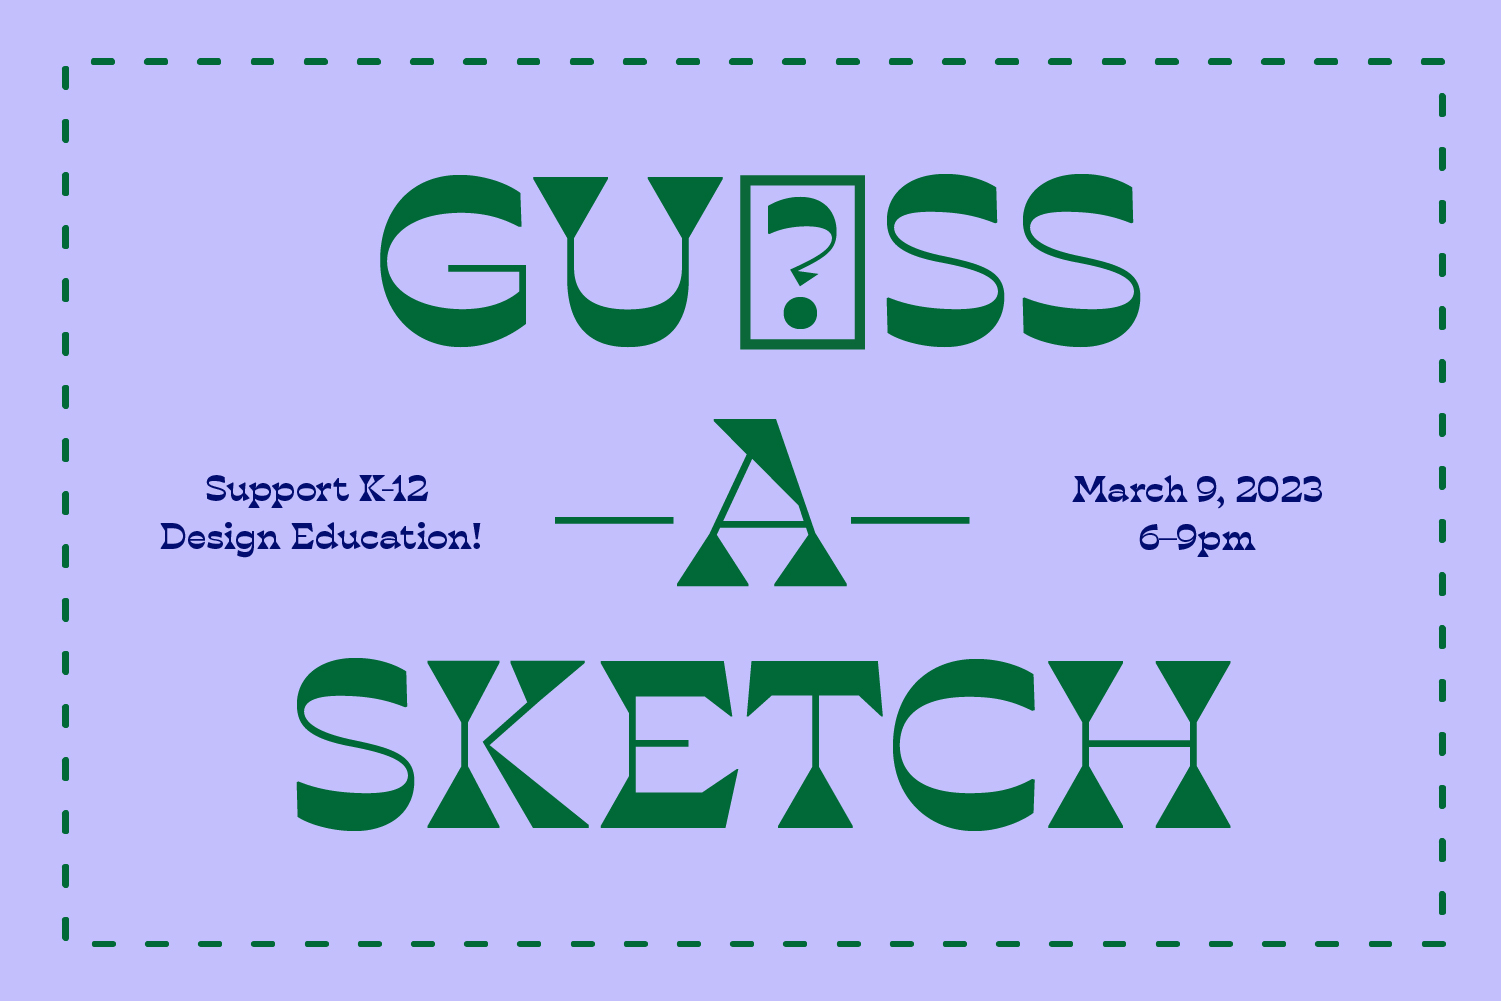 Guess-A-Sketch 2023 event graphic